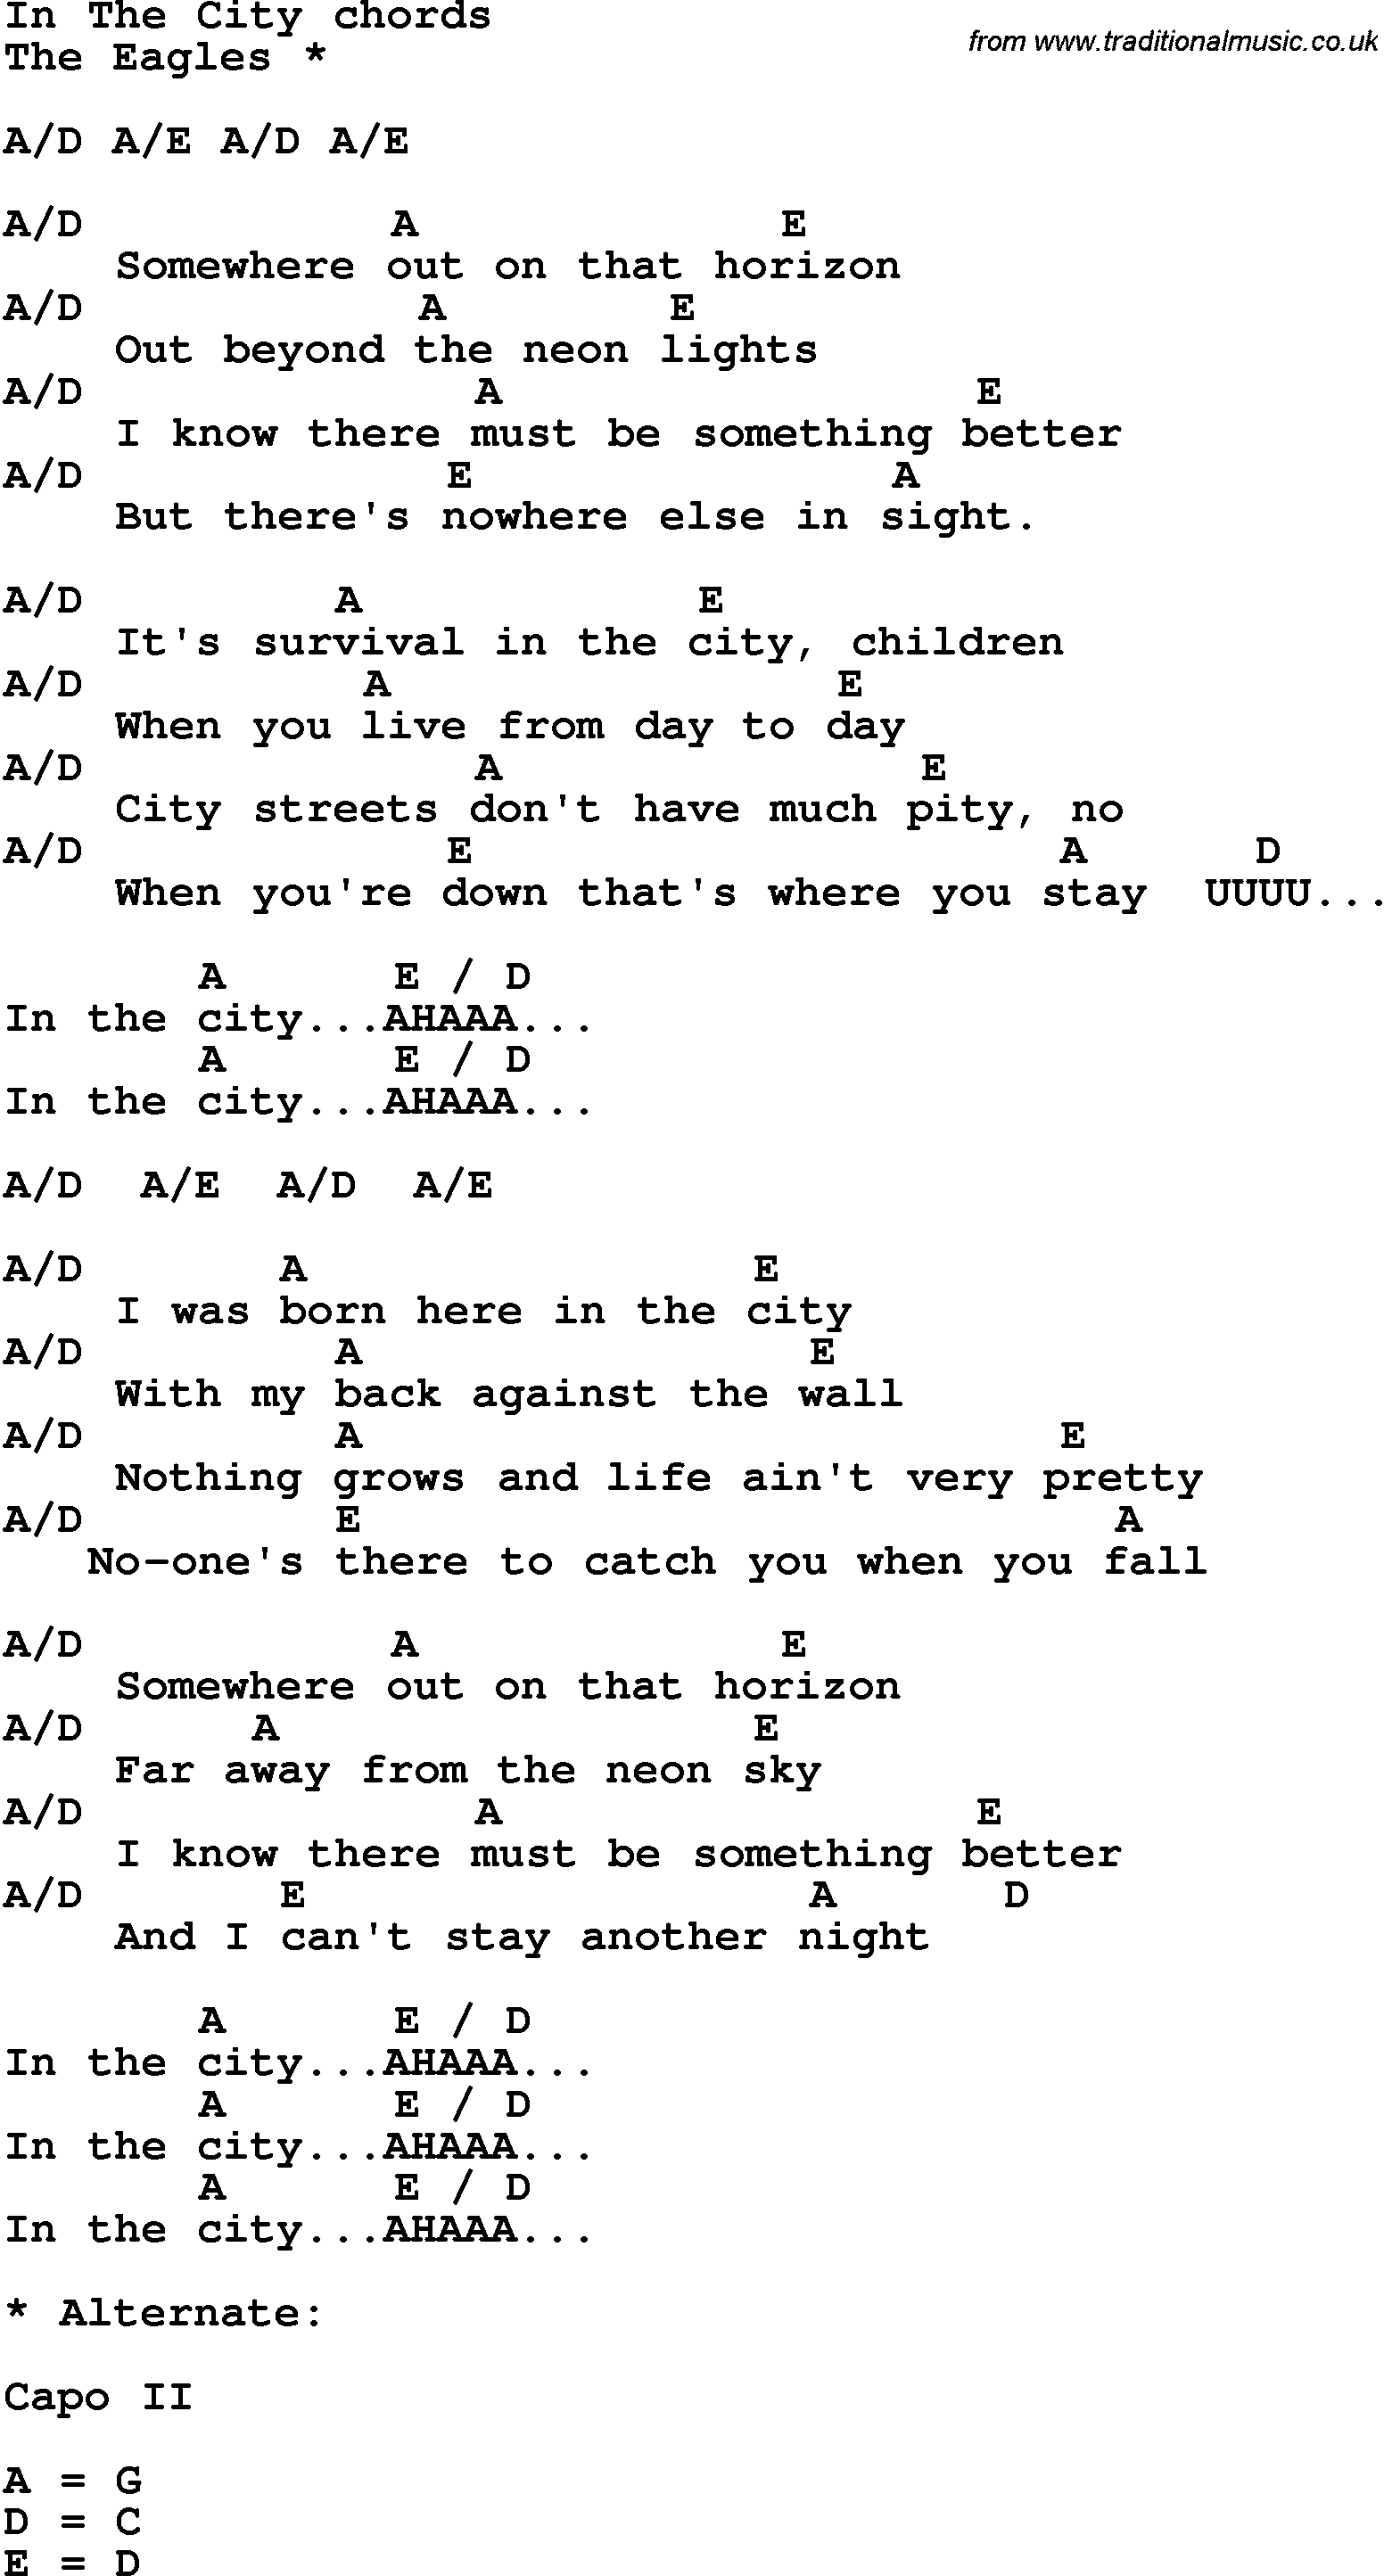 Song Lyrics with guitar chords for In The City